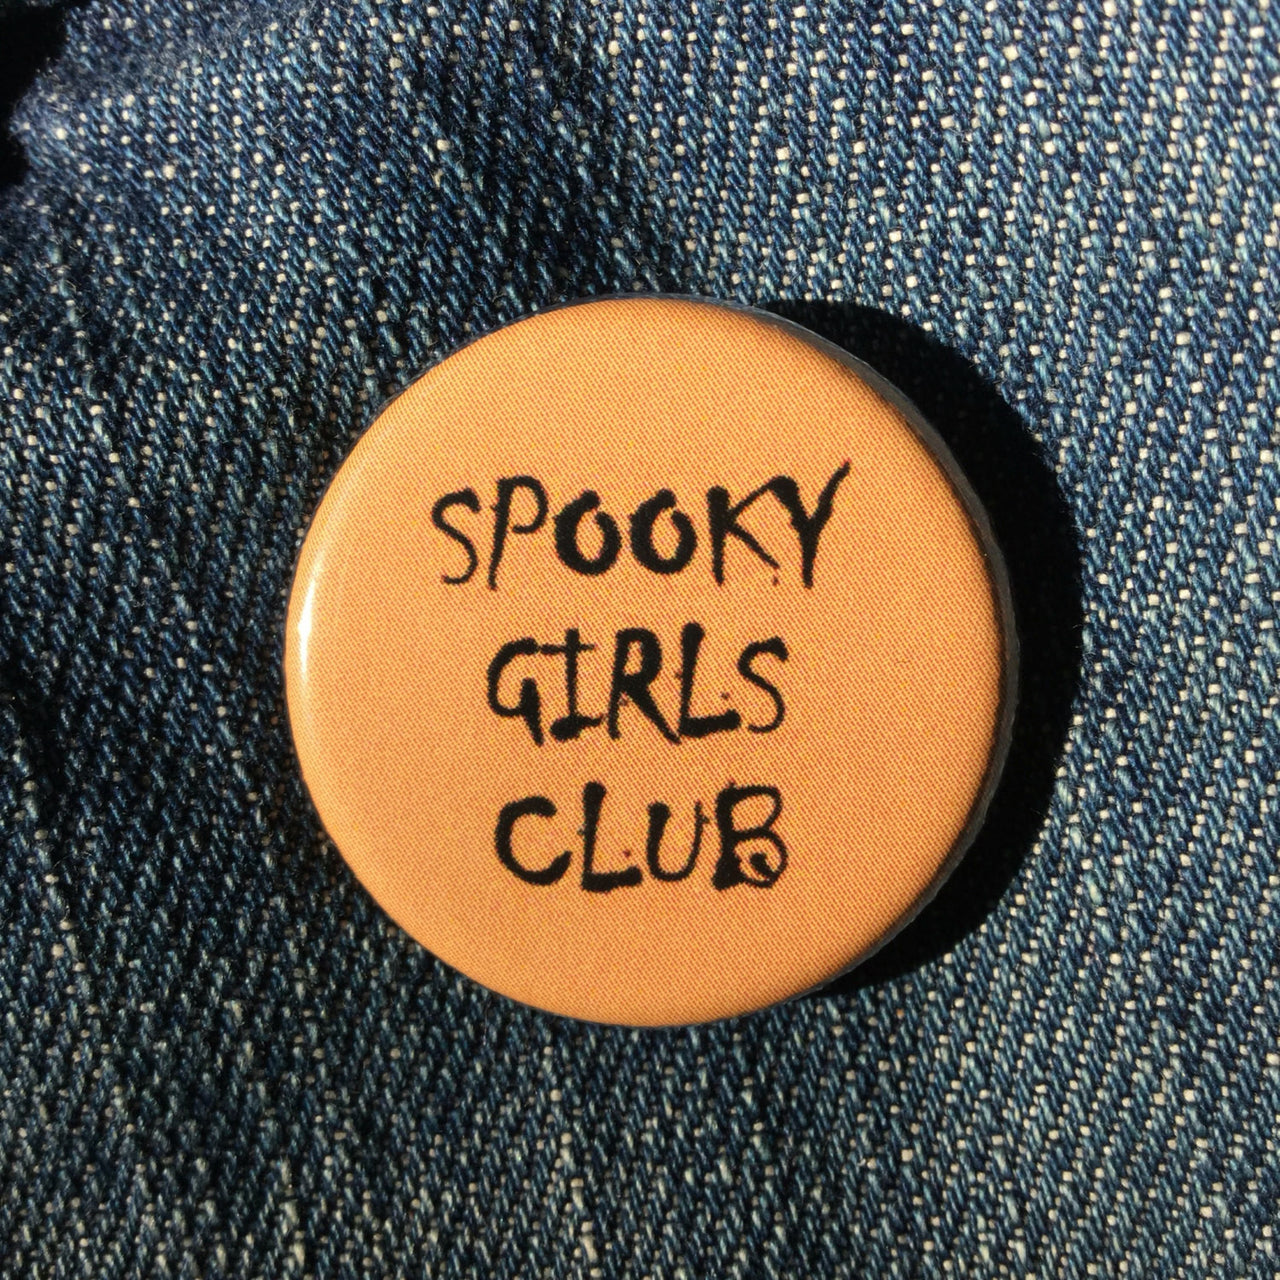 Spooky girls club - Radical Buttons